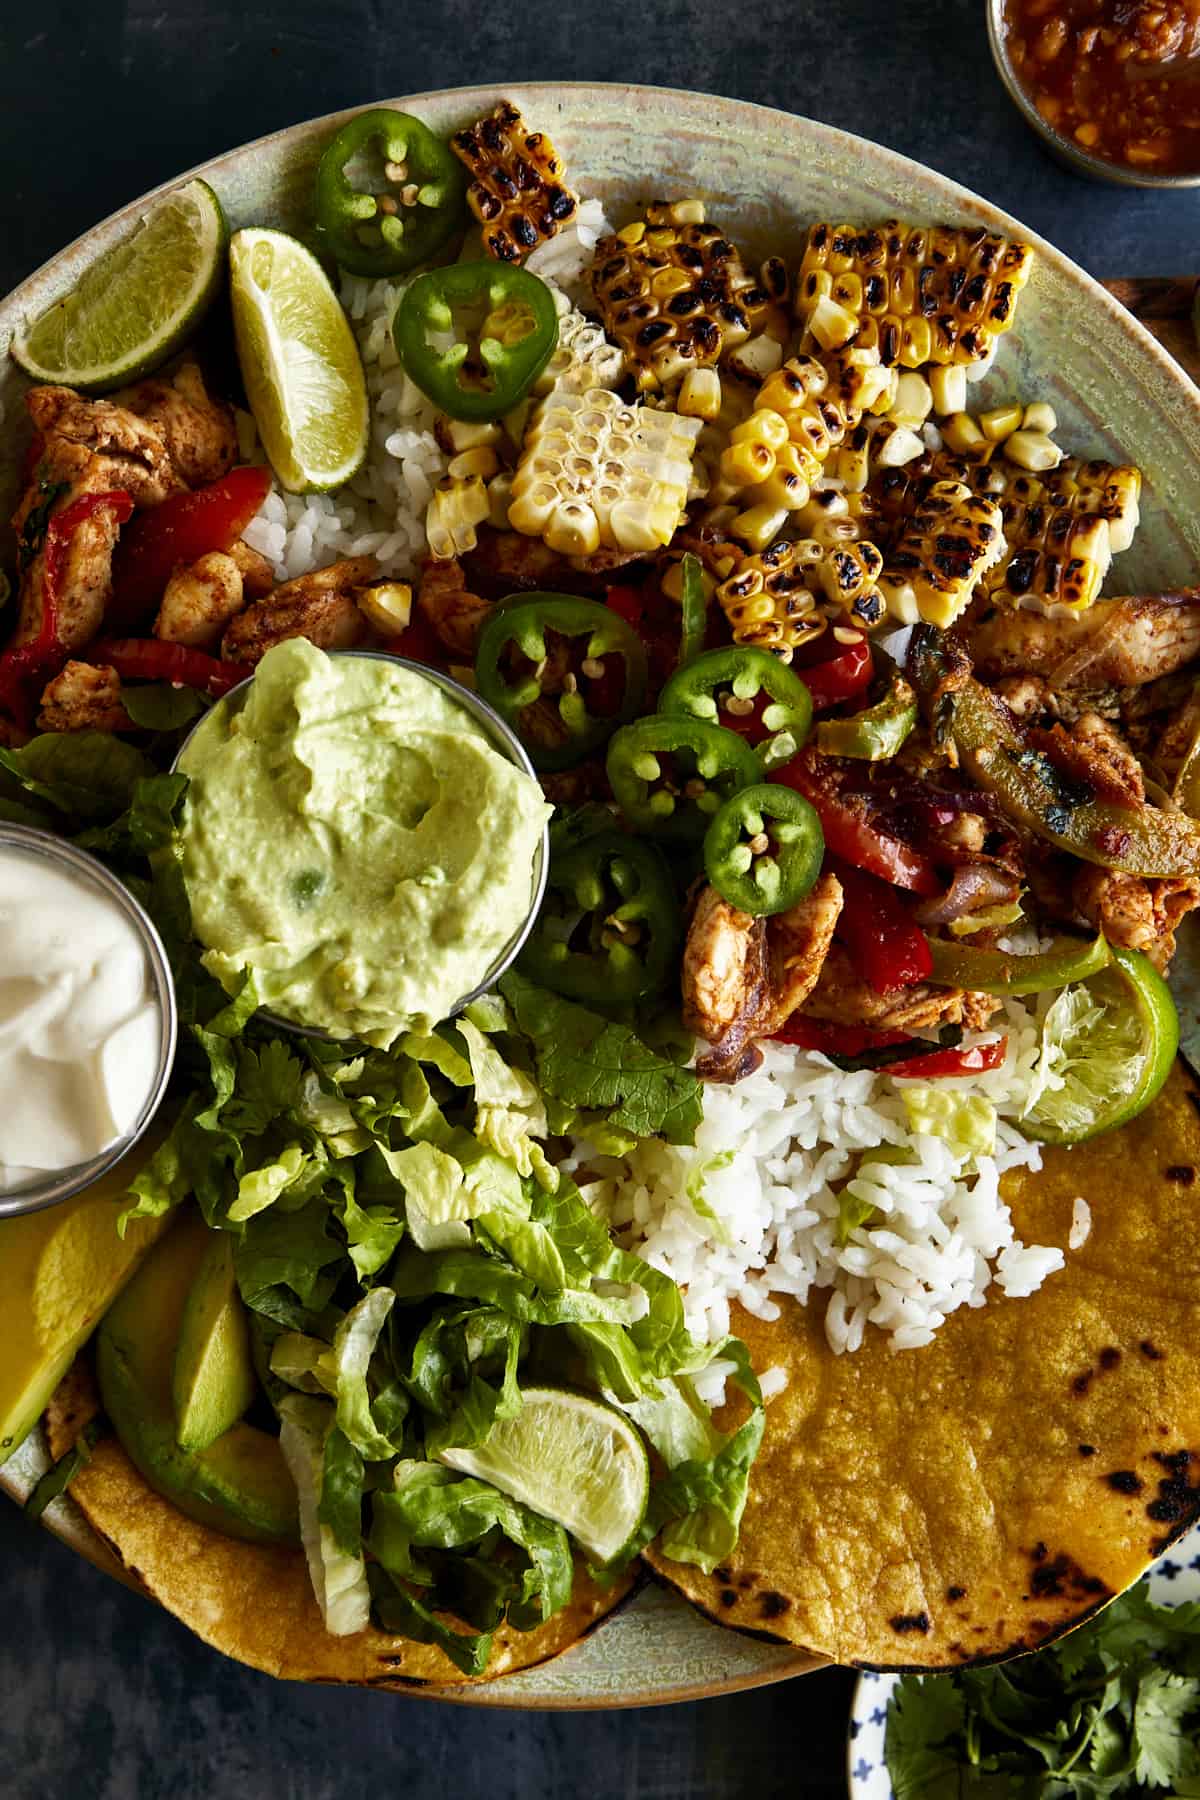 A chicken fajita bowl with chicken, peppers and onions, grilled corn, cilantro lime rice, mashed avocado, sour cream, corn tortillas, and lettuce. 